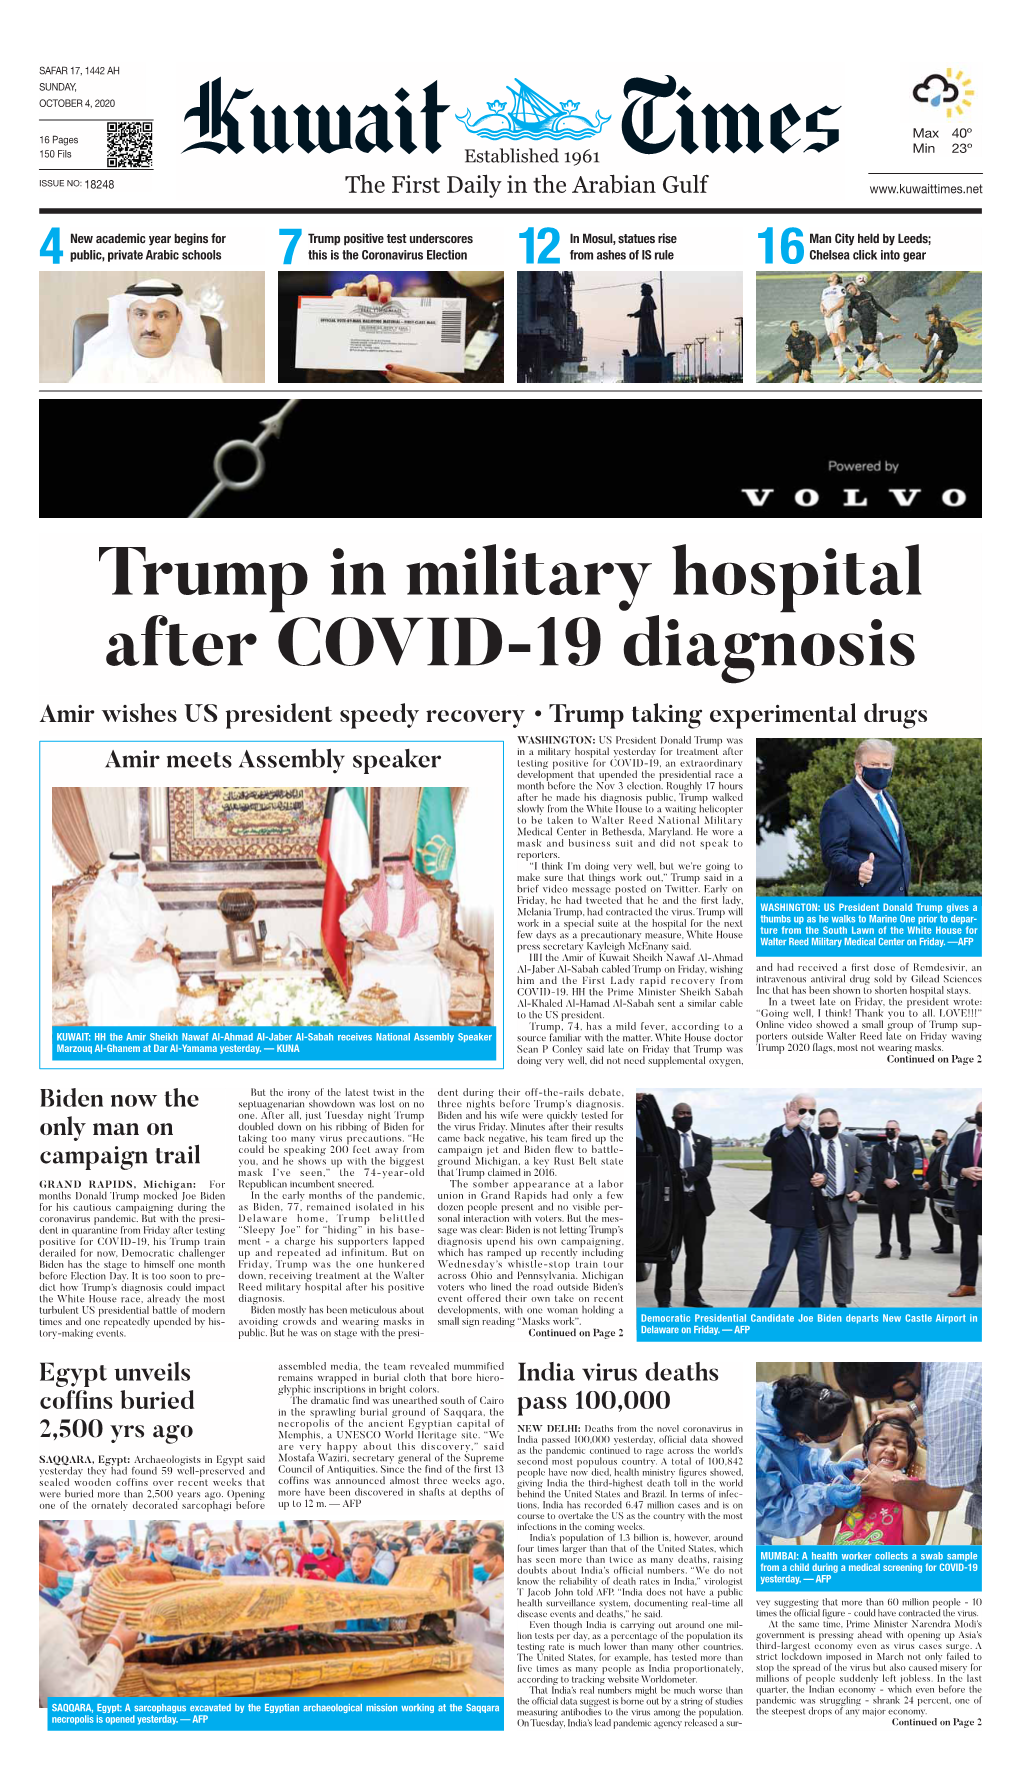 Trump in Military Hospital After COVID-19 Diagnosis